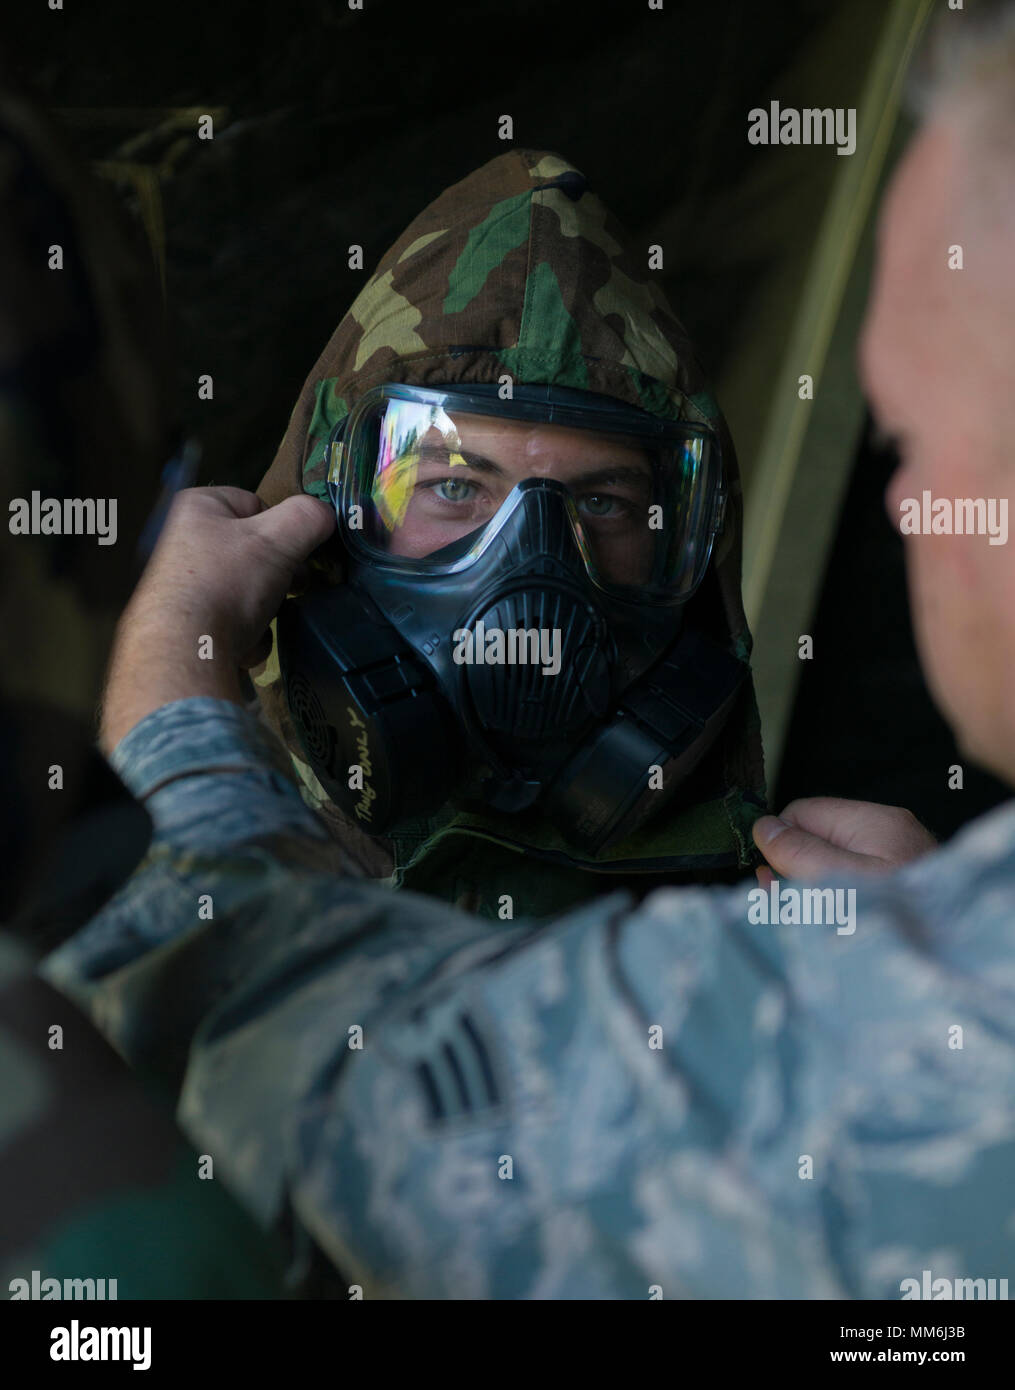 A Reserve Citizen Airman from the 914th Air Refueling Wing has his gas mask adjusted by an instructor during an annual readiness assessment, conducted at Niagara Falls Air Reserve Station, N.Y., September 9, 2017. The assessment is meant to gauge the unit's ability to operate in different protective postures (MOPP) as well as perform self aid and buddy care. (U.S. Air Force photo by Tech. Sgt. Steph Sawyer) Stock Photo